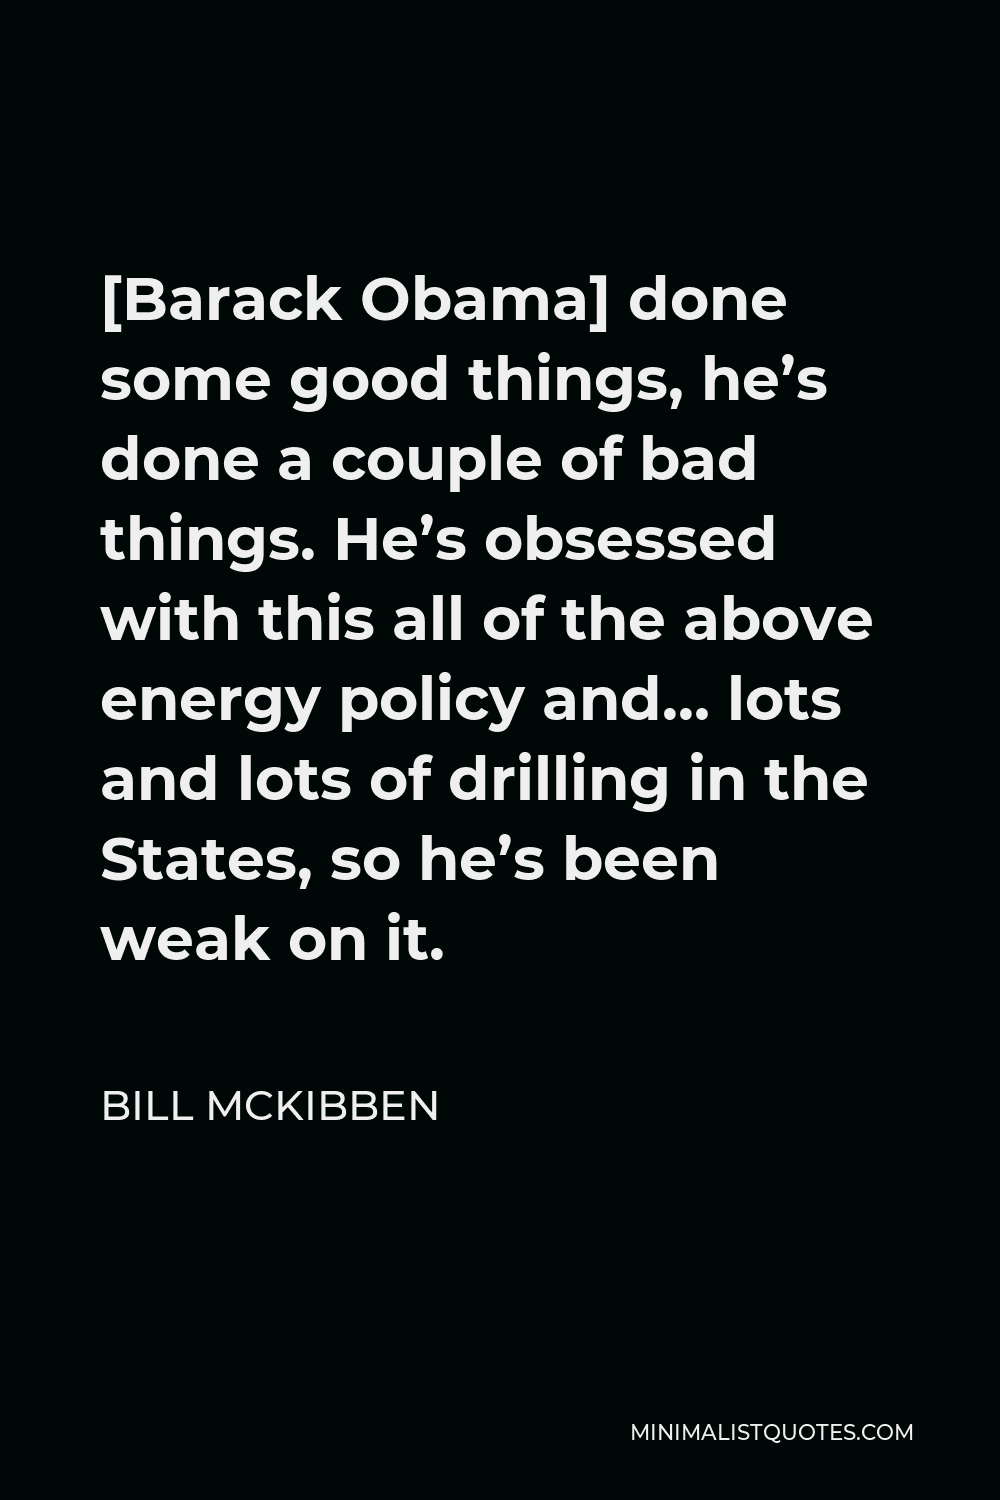 Bill McKibben Quote - [Barack Obama] done some good things, he’s done a couple of bad things. He’s obsessed with this all of the above energy policy and… lots and lots of drilling in the States, so he’s been weak on it.